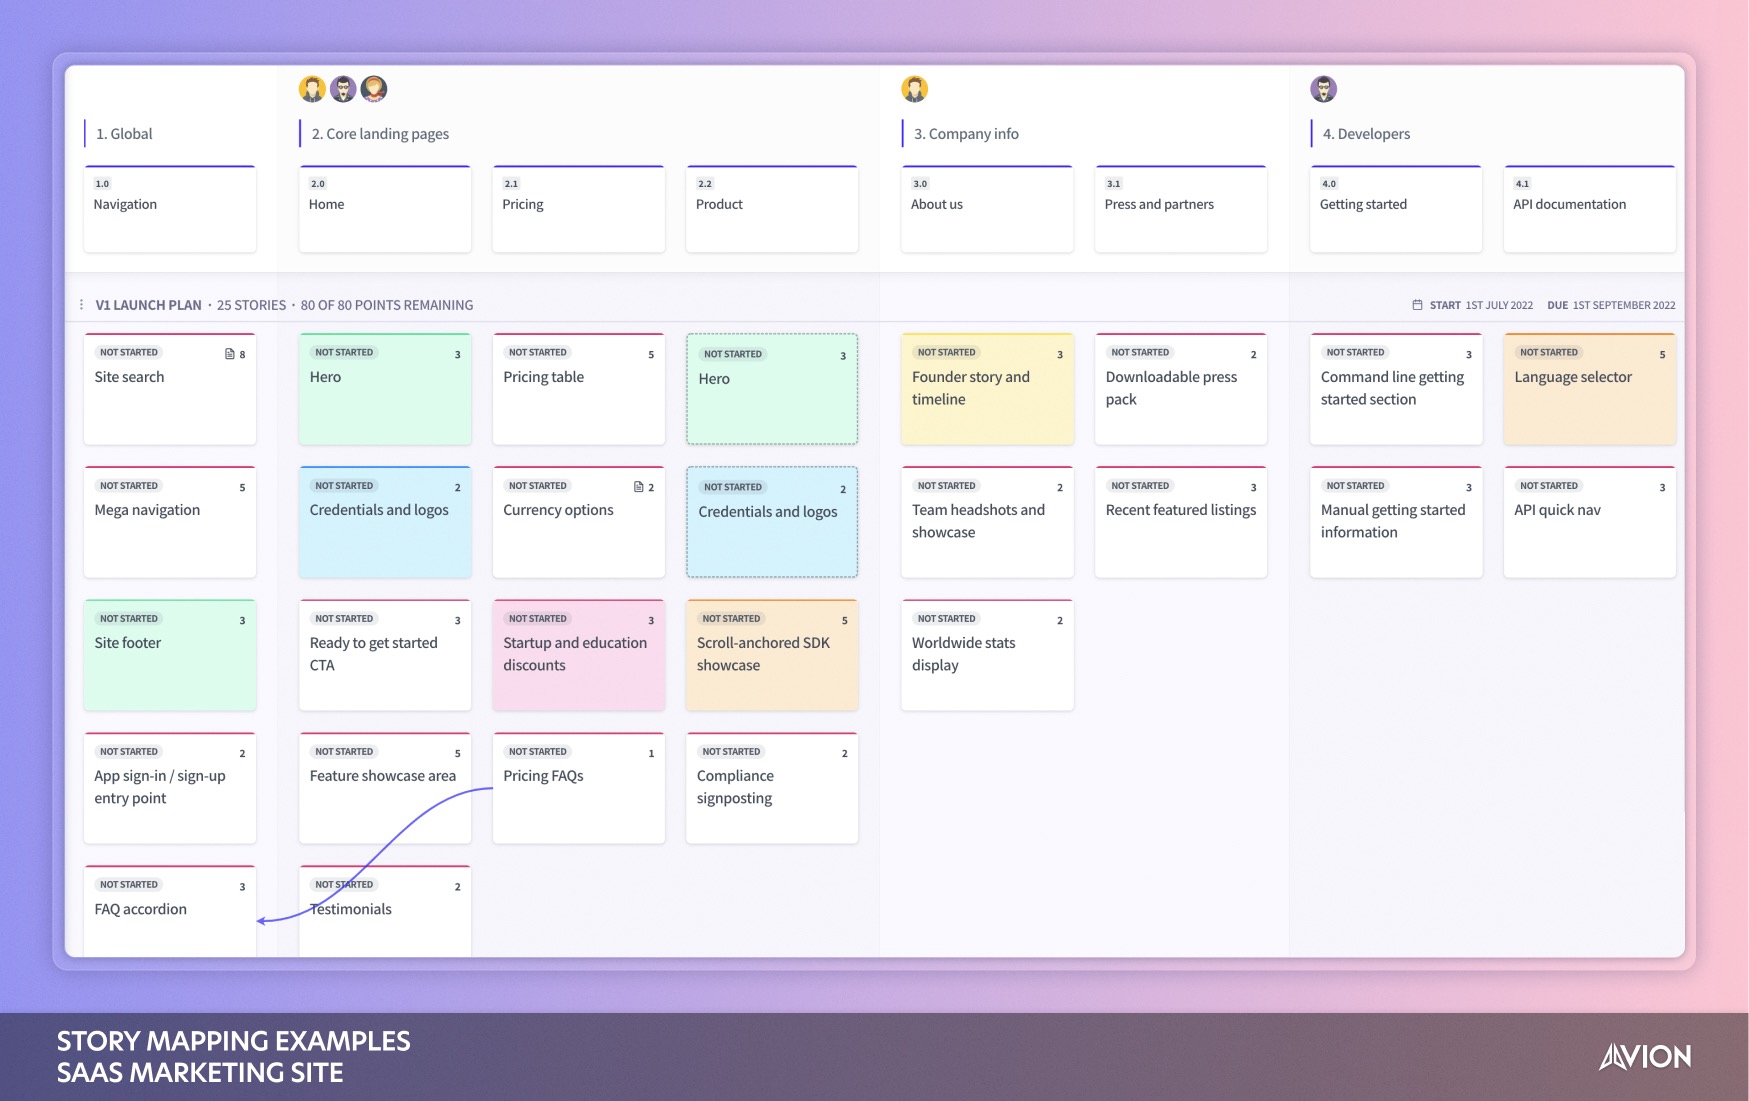 An example user story map based on a typical SaaS marketing website